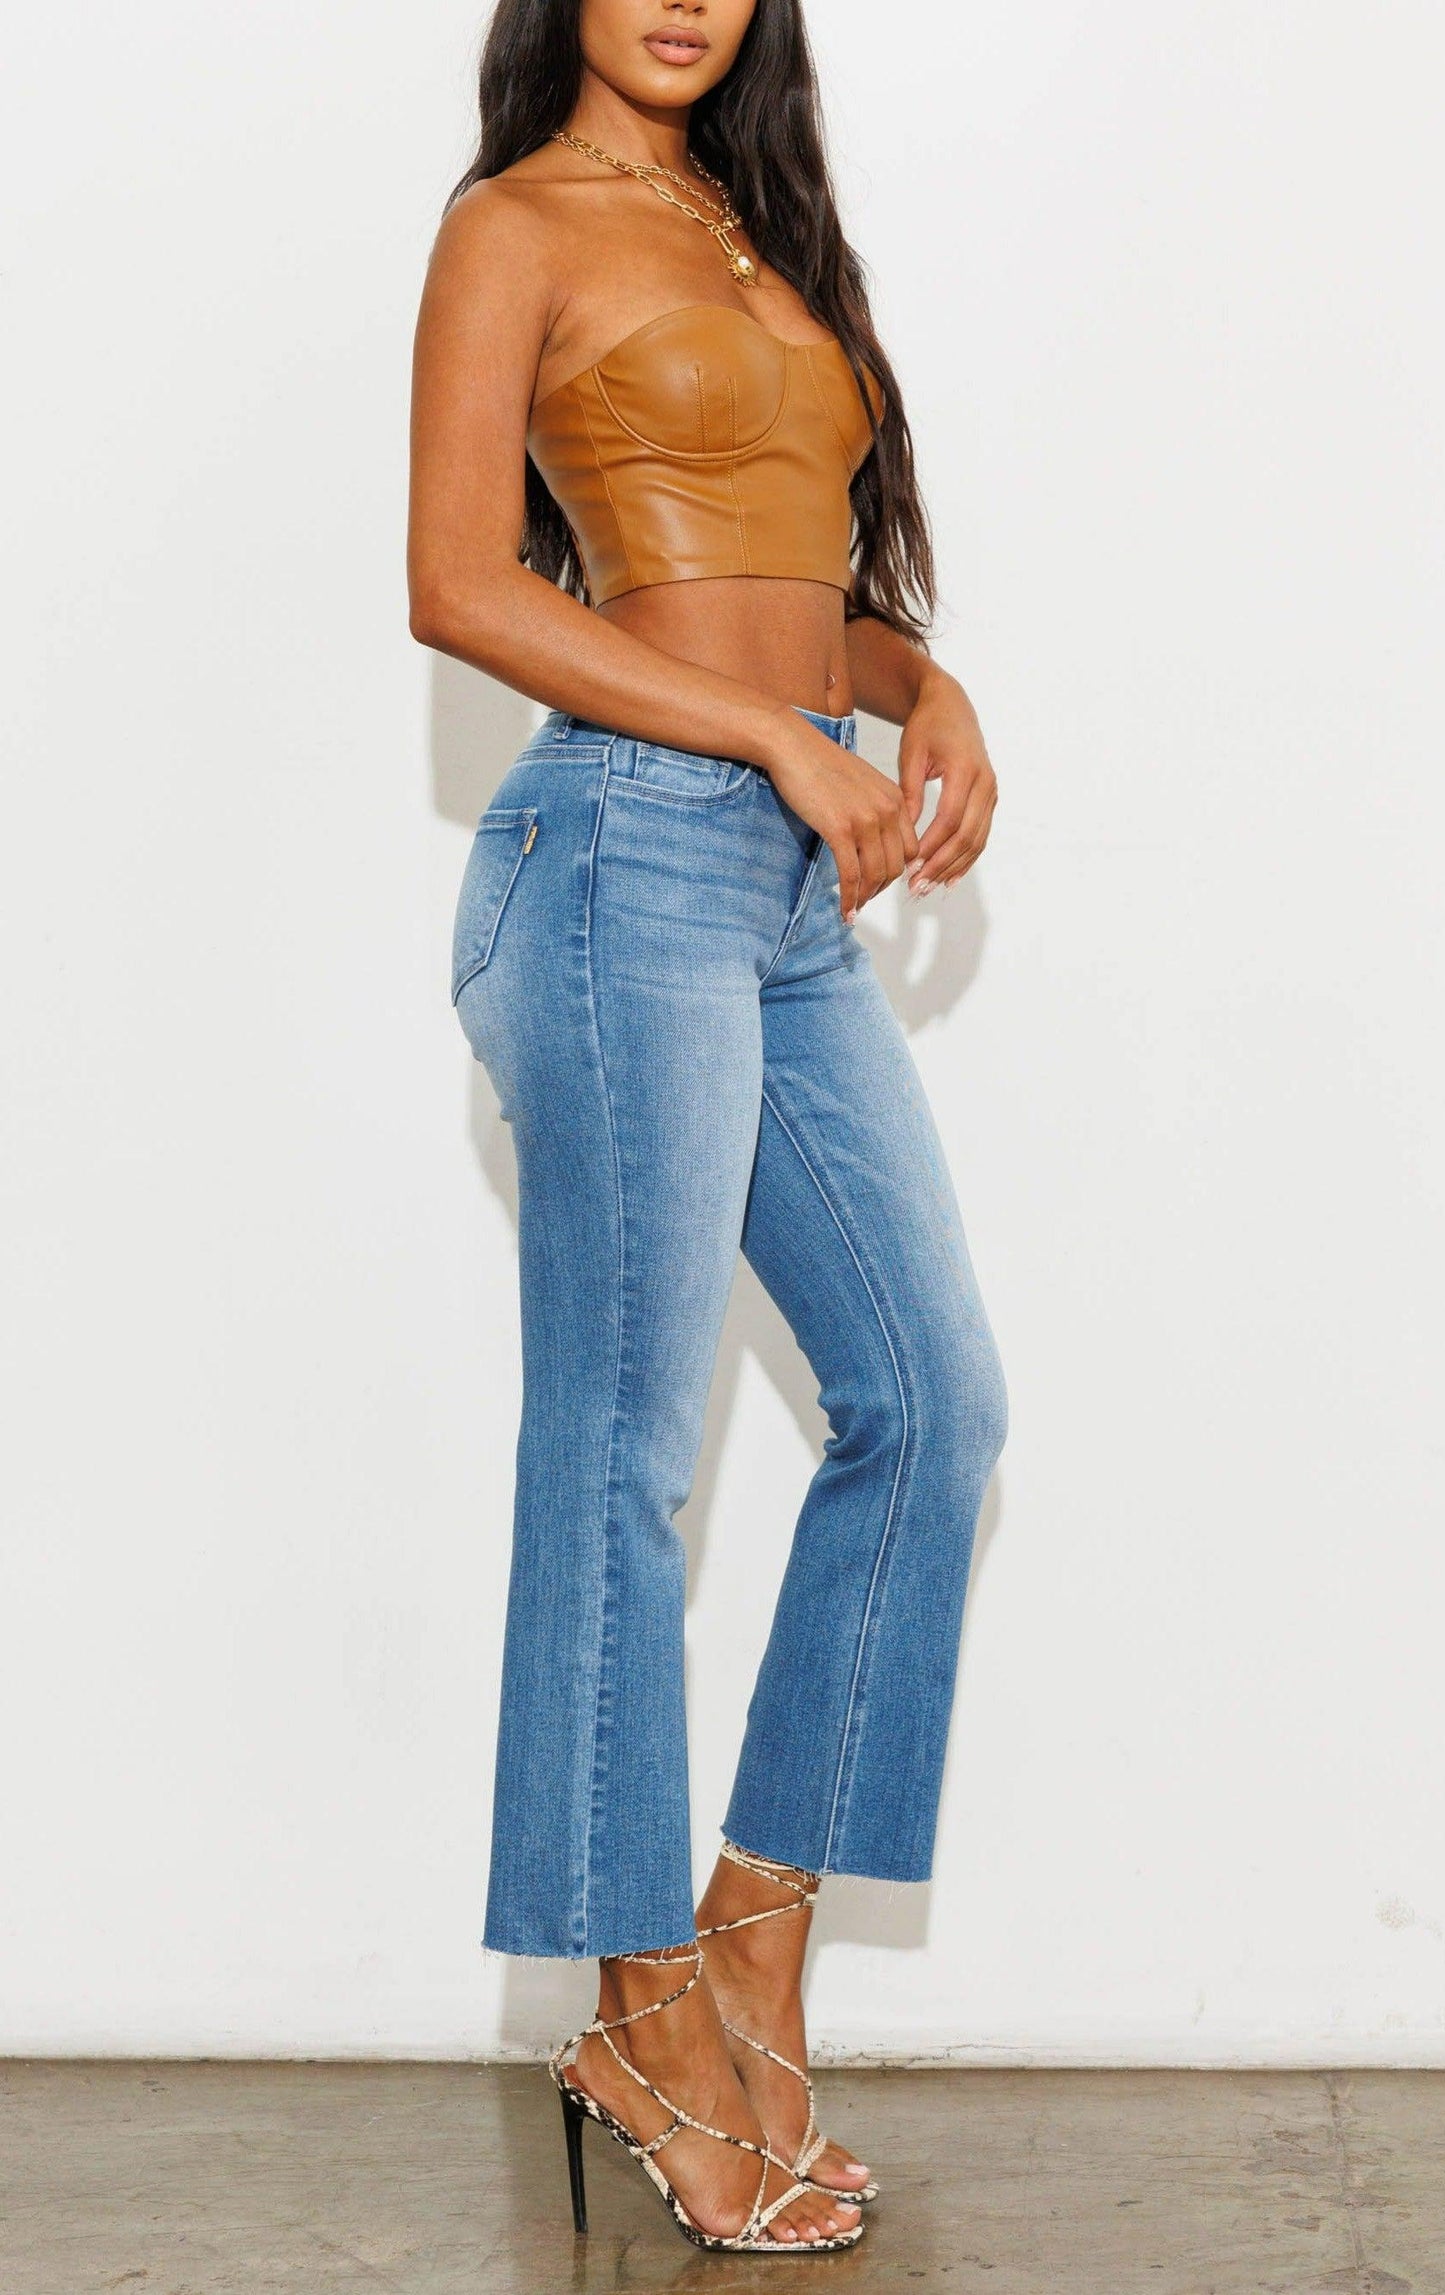 Mid-Rise Flare Jean - SASHAY COUTURE BOUTIQUE Pants